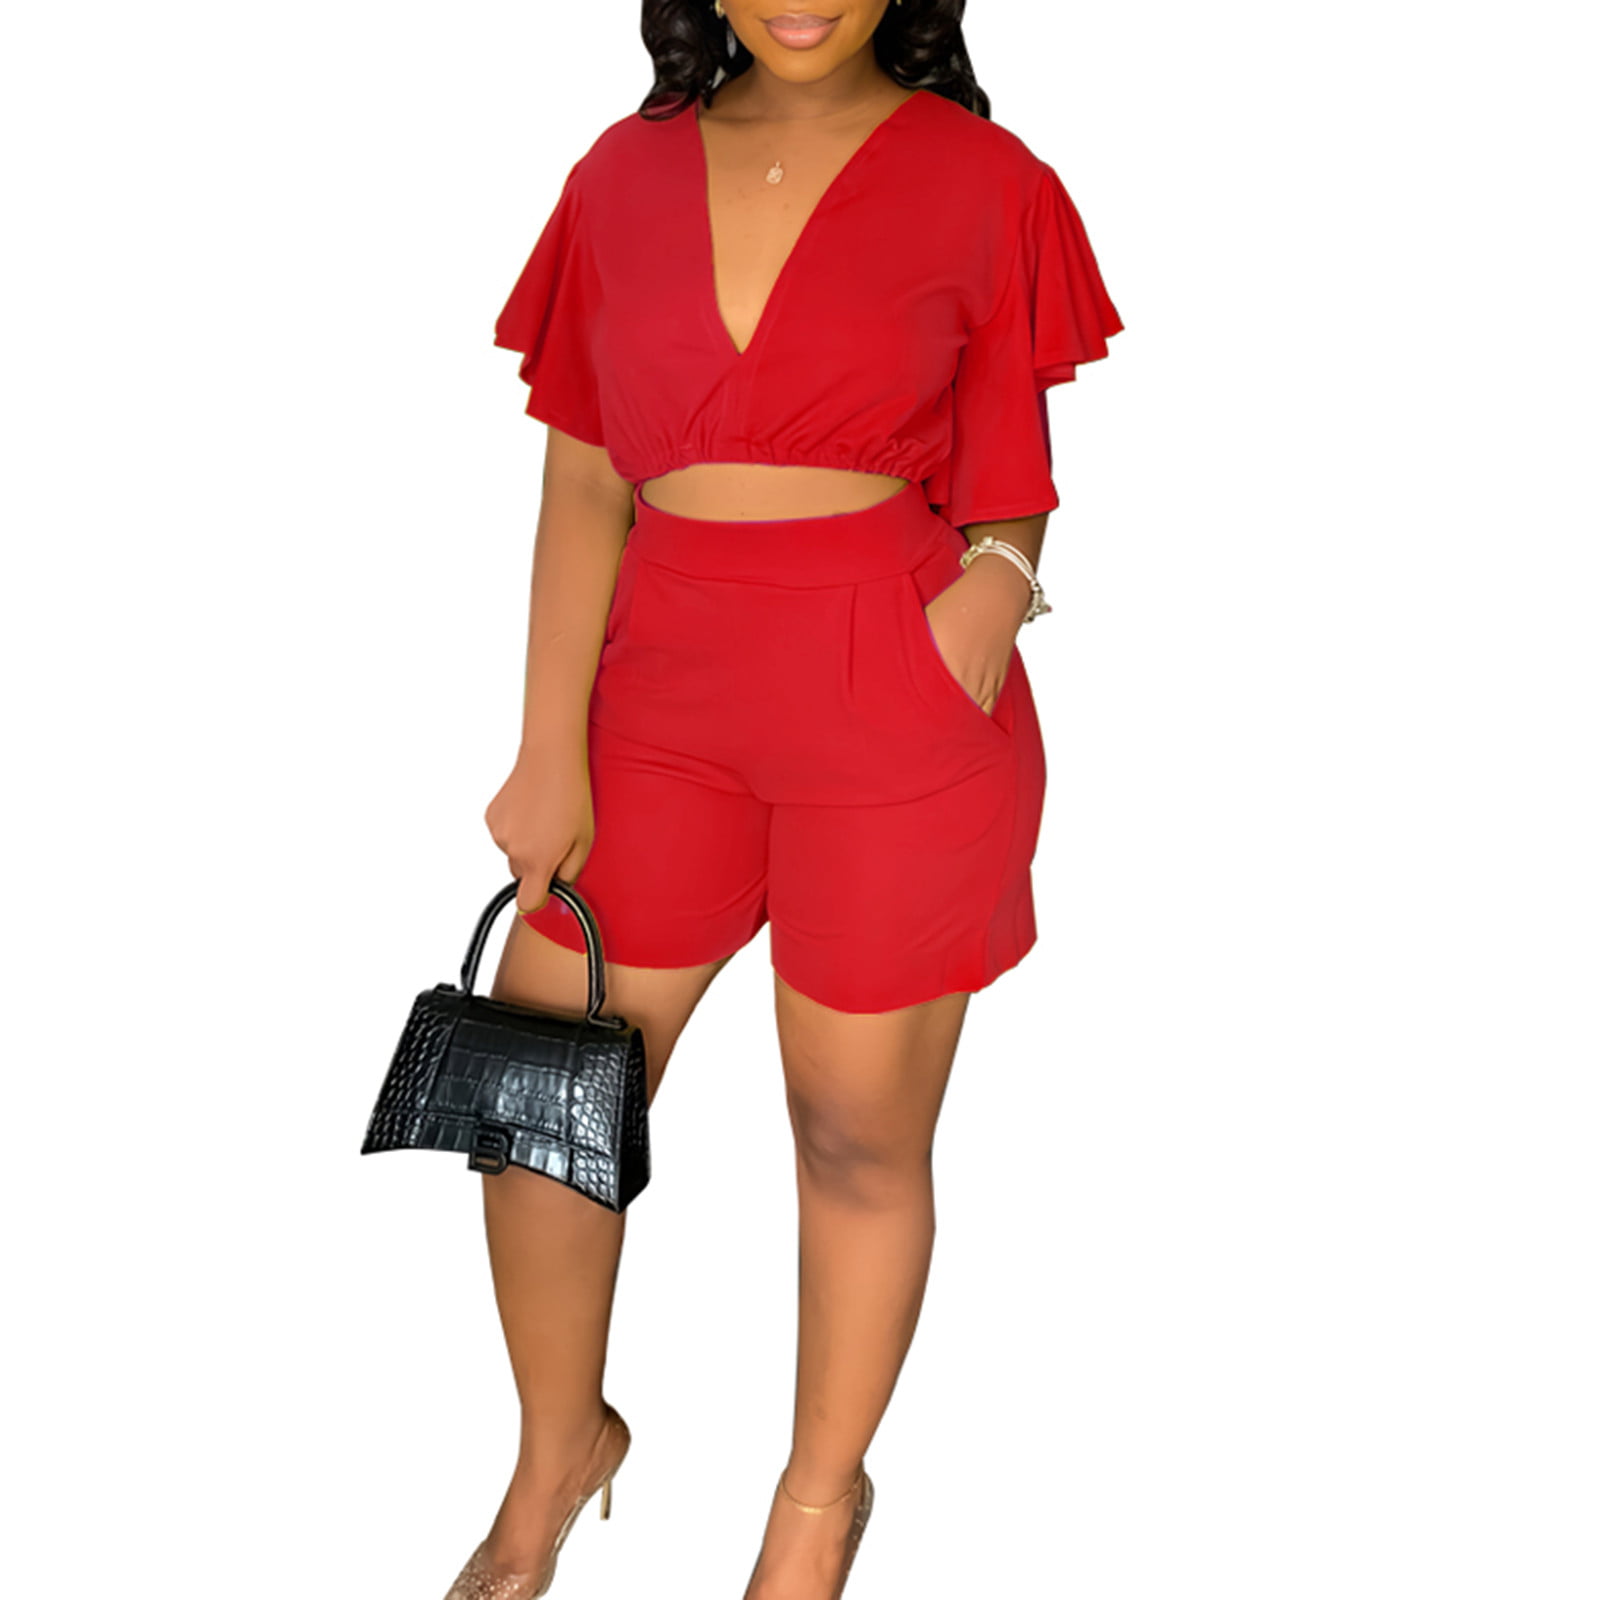 REORIAFEE Outfits for Women Plus Size Summer Set Women Casual Summer Round  Neck Short Sleeve Tops Shorts Two Pieces Set Suit Red XL